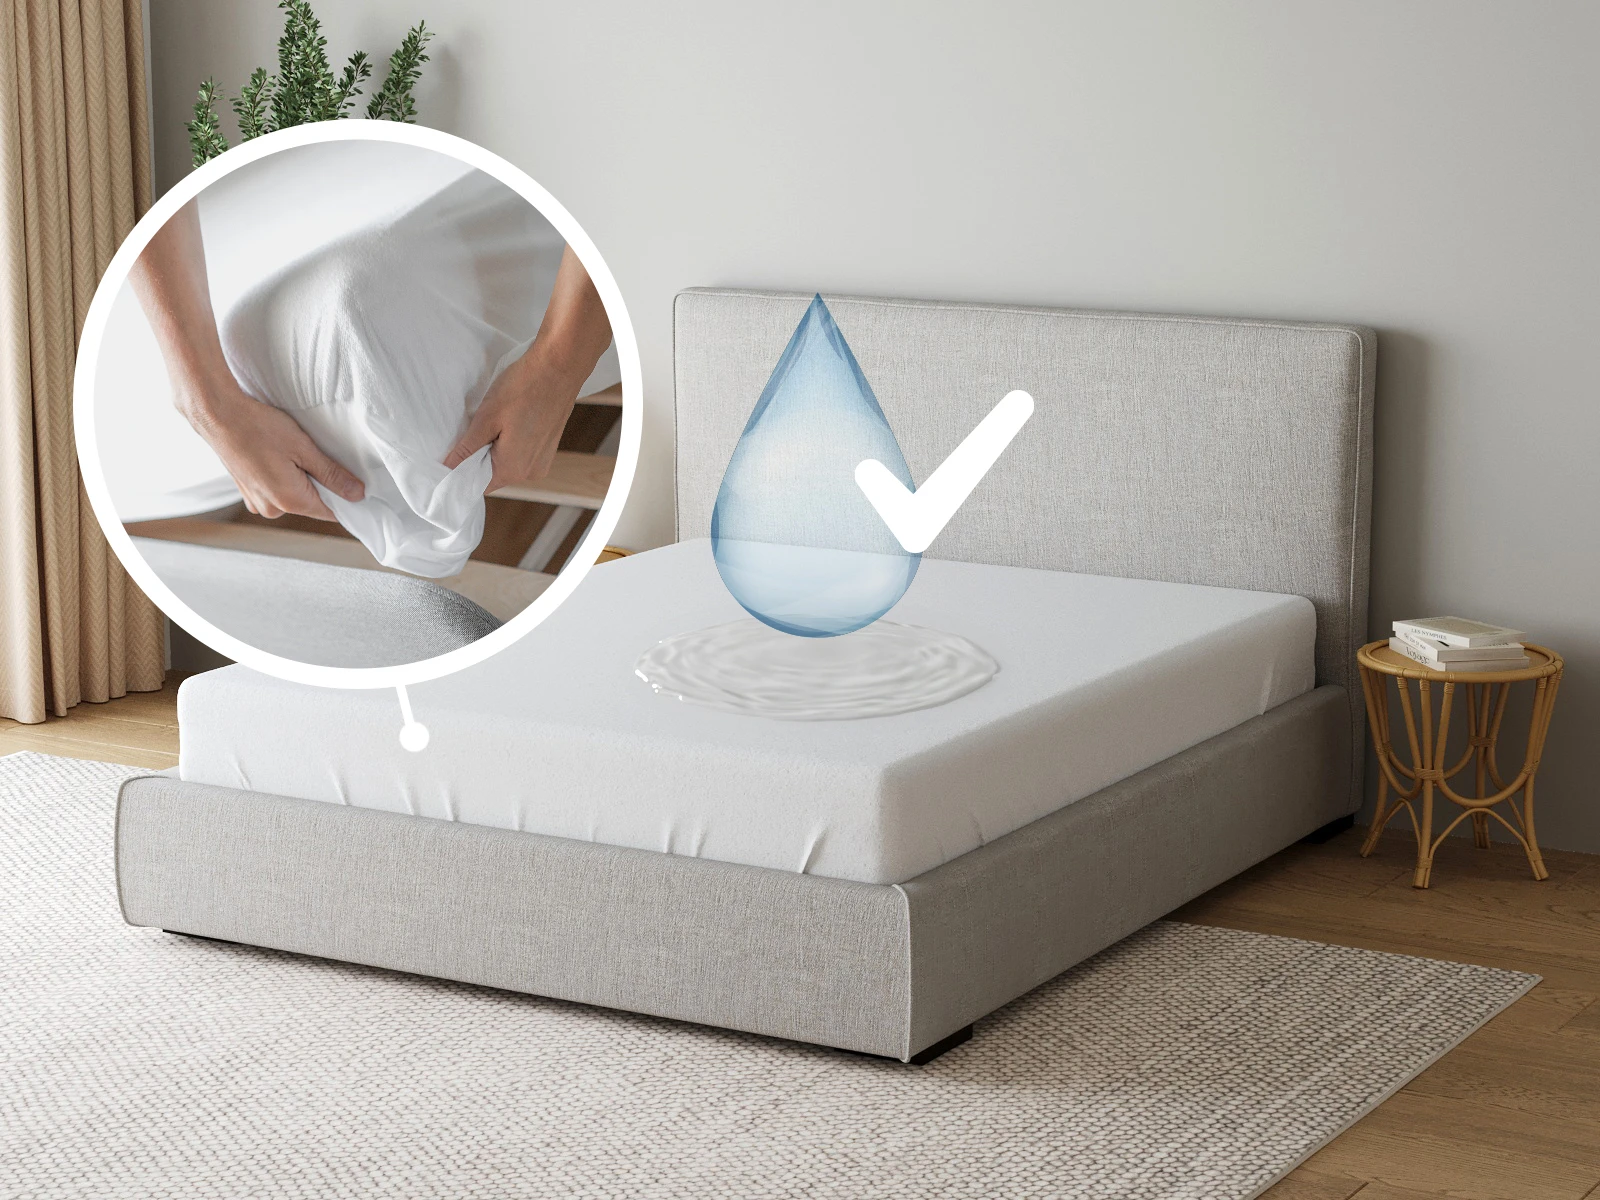 1 Waterproof mattress protector all-round protective cover 140x200cm